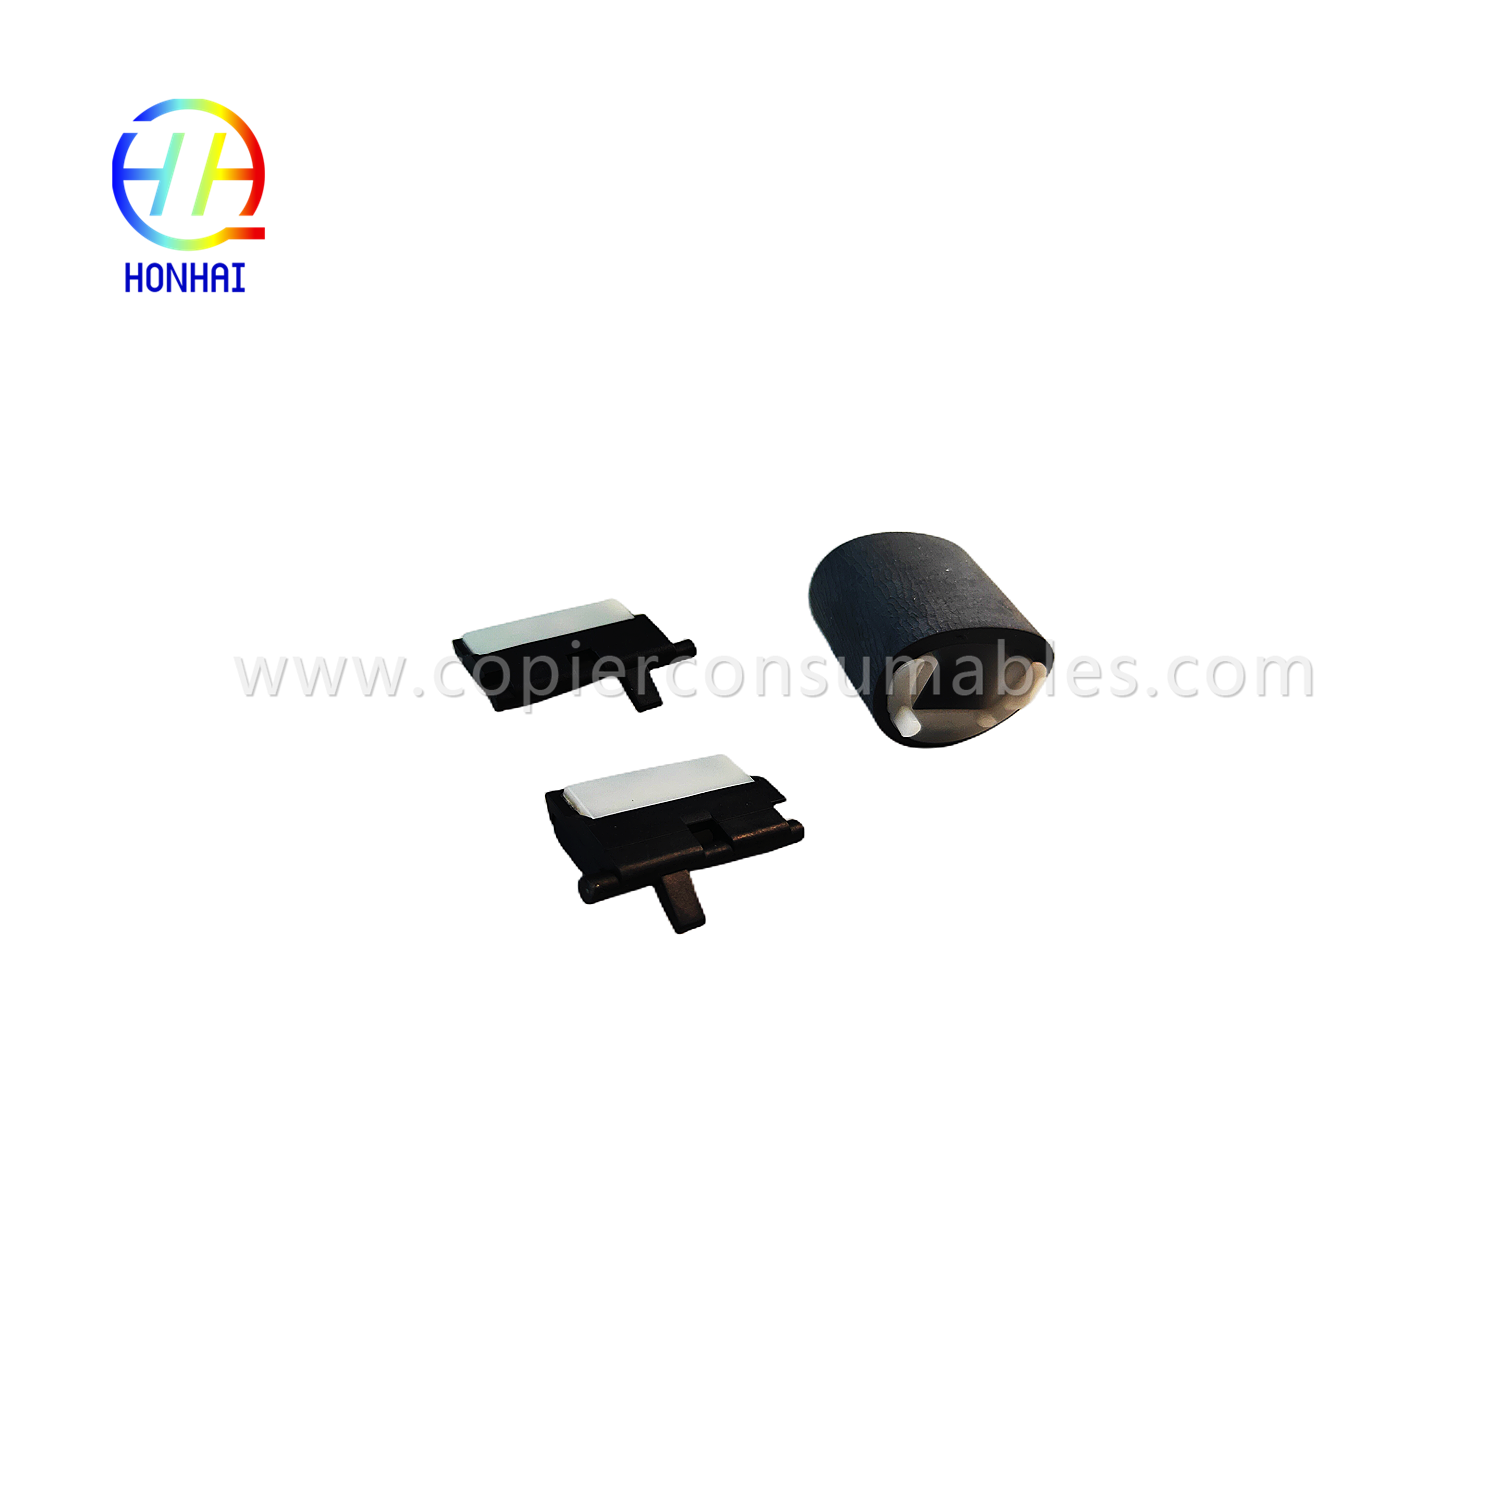 https://www.copierconsumables.com/paper-pickup-roller-separates-pad%ef%bc%88set%ef%bc%89for-hp-pagewide-x585z-x451dn-x476dn-x551dw-x576dw-556dn-5 452dn-477dn-552-577z-cb780-60012-tuote/